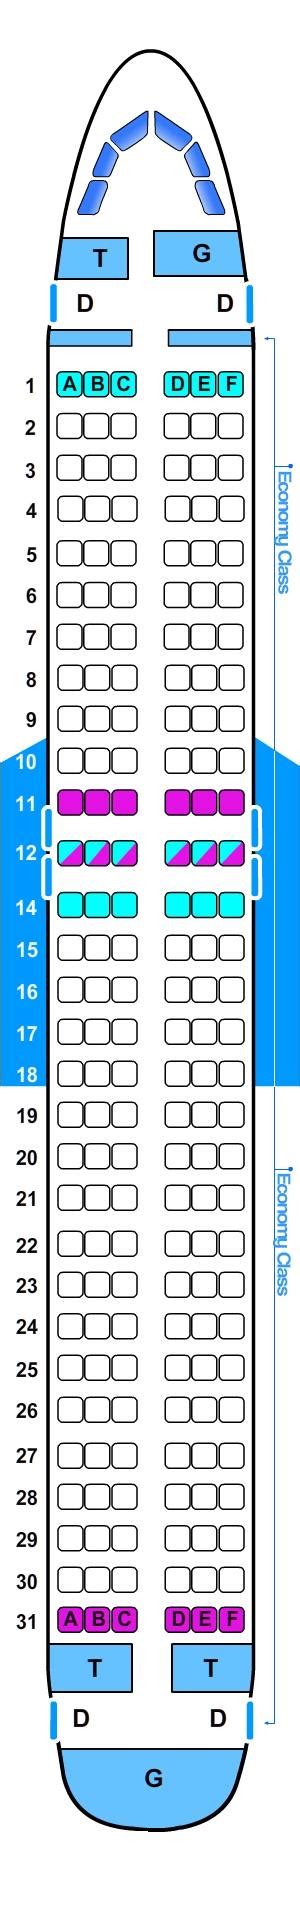 American Airlines Airbus A320 aircraft seat map. American Airlines inherited a large fleet of Airbus A320 aircraft when it merged with US Airways. The type is configured with a two class layout for 150 passengers. Several rows in Economy class are sold as "Main Cabin Extra" and offer additional legroom.. 